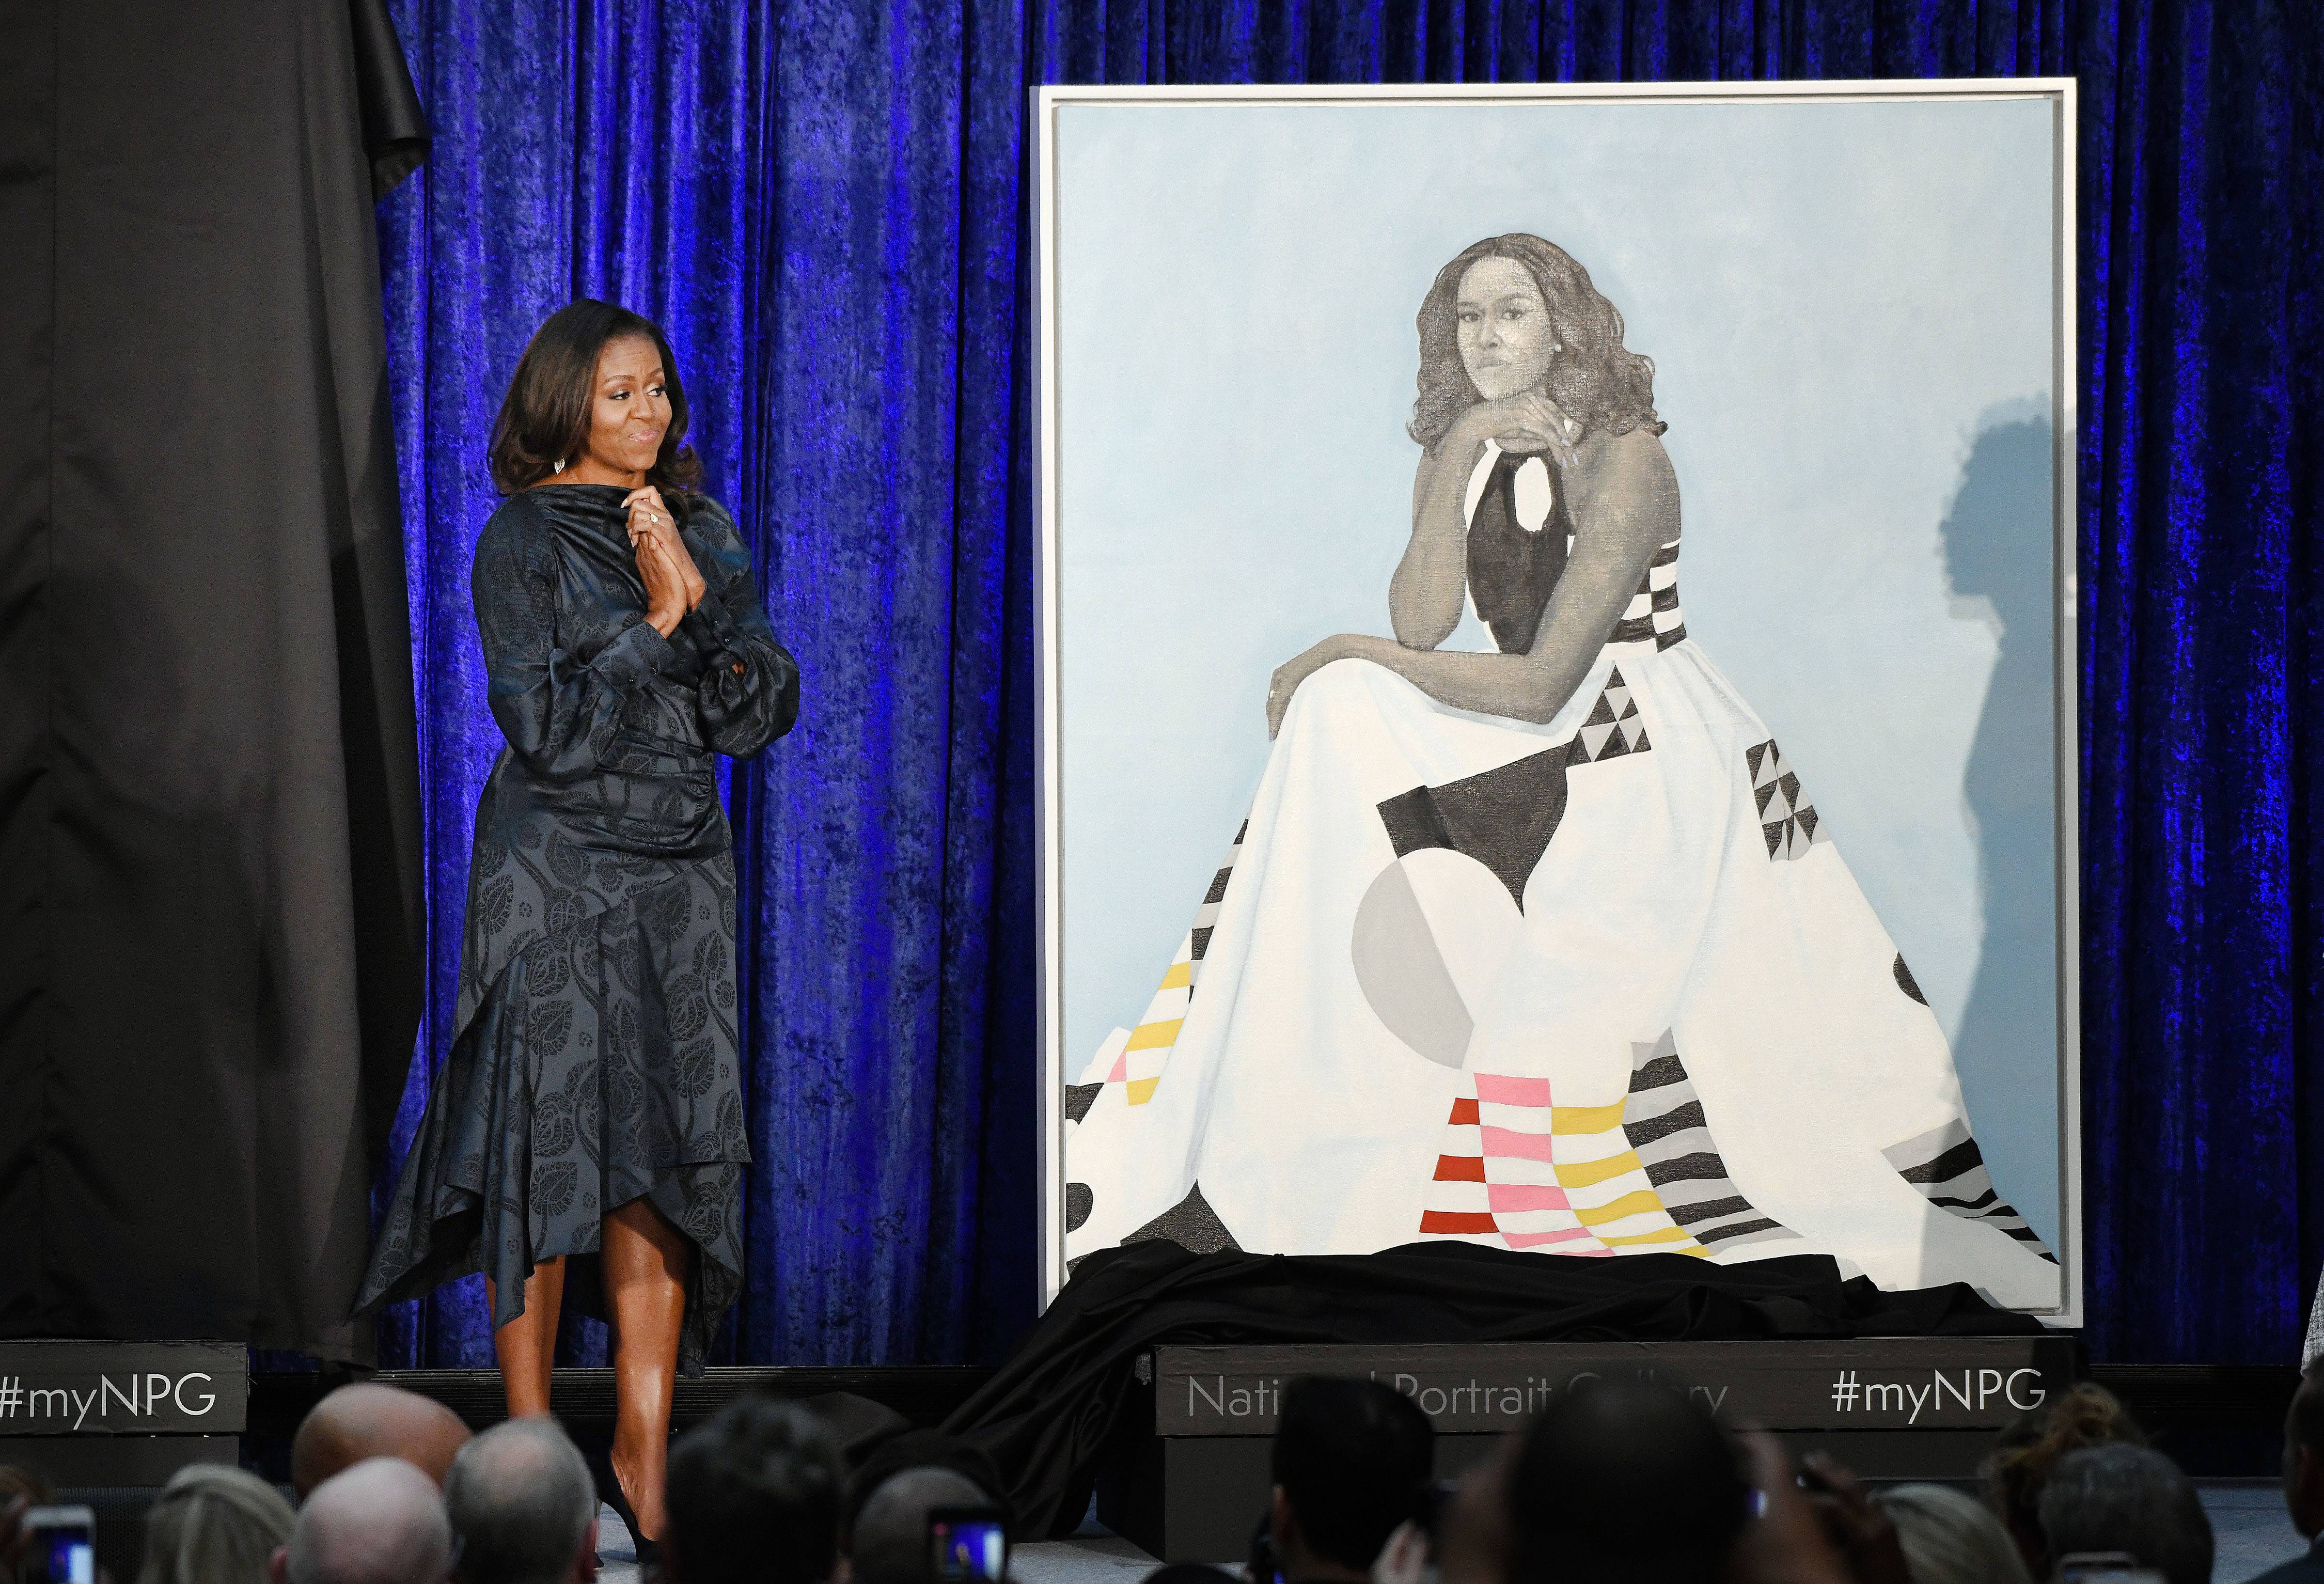 Former First Lady Michelle Obama unveils her official portrait at the National Portrait Gallery , February 12, 2018 in Washington, DC. Photo by Olivier Douliery/Abaca Press(Sipa via AP Images)